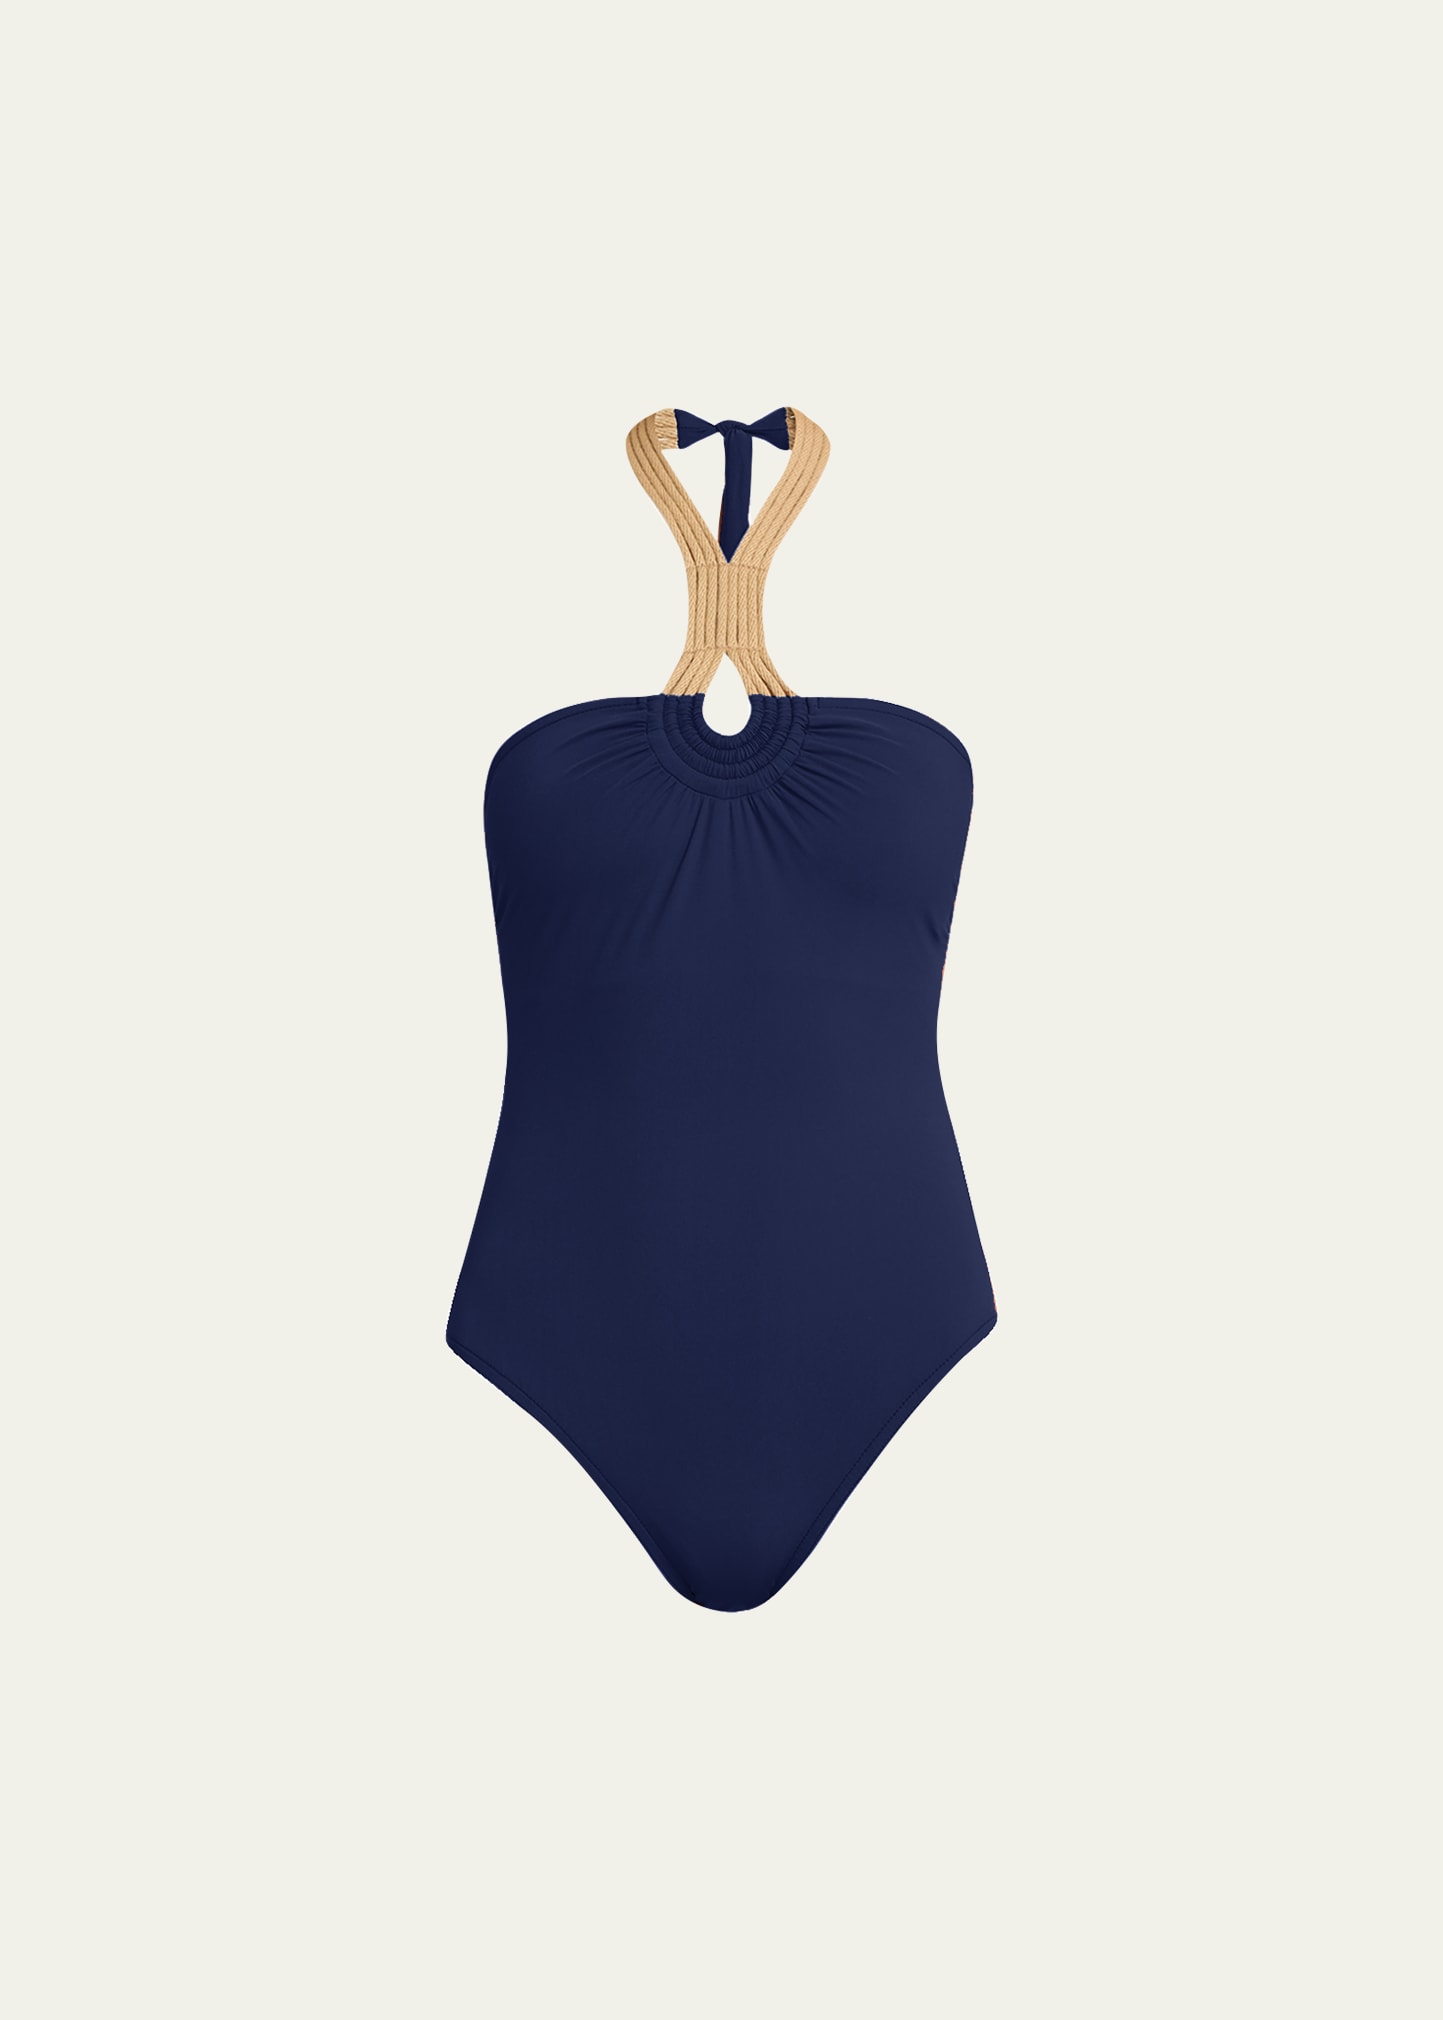 Karla Colletto Charlie Halter Bandeau One-piece Swimsuit In Navy